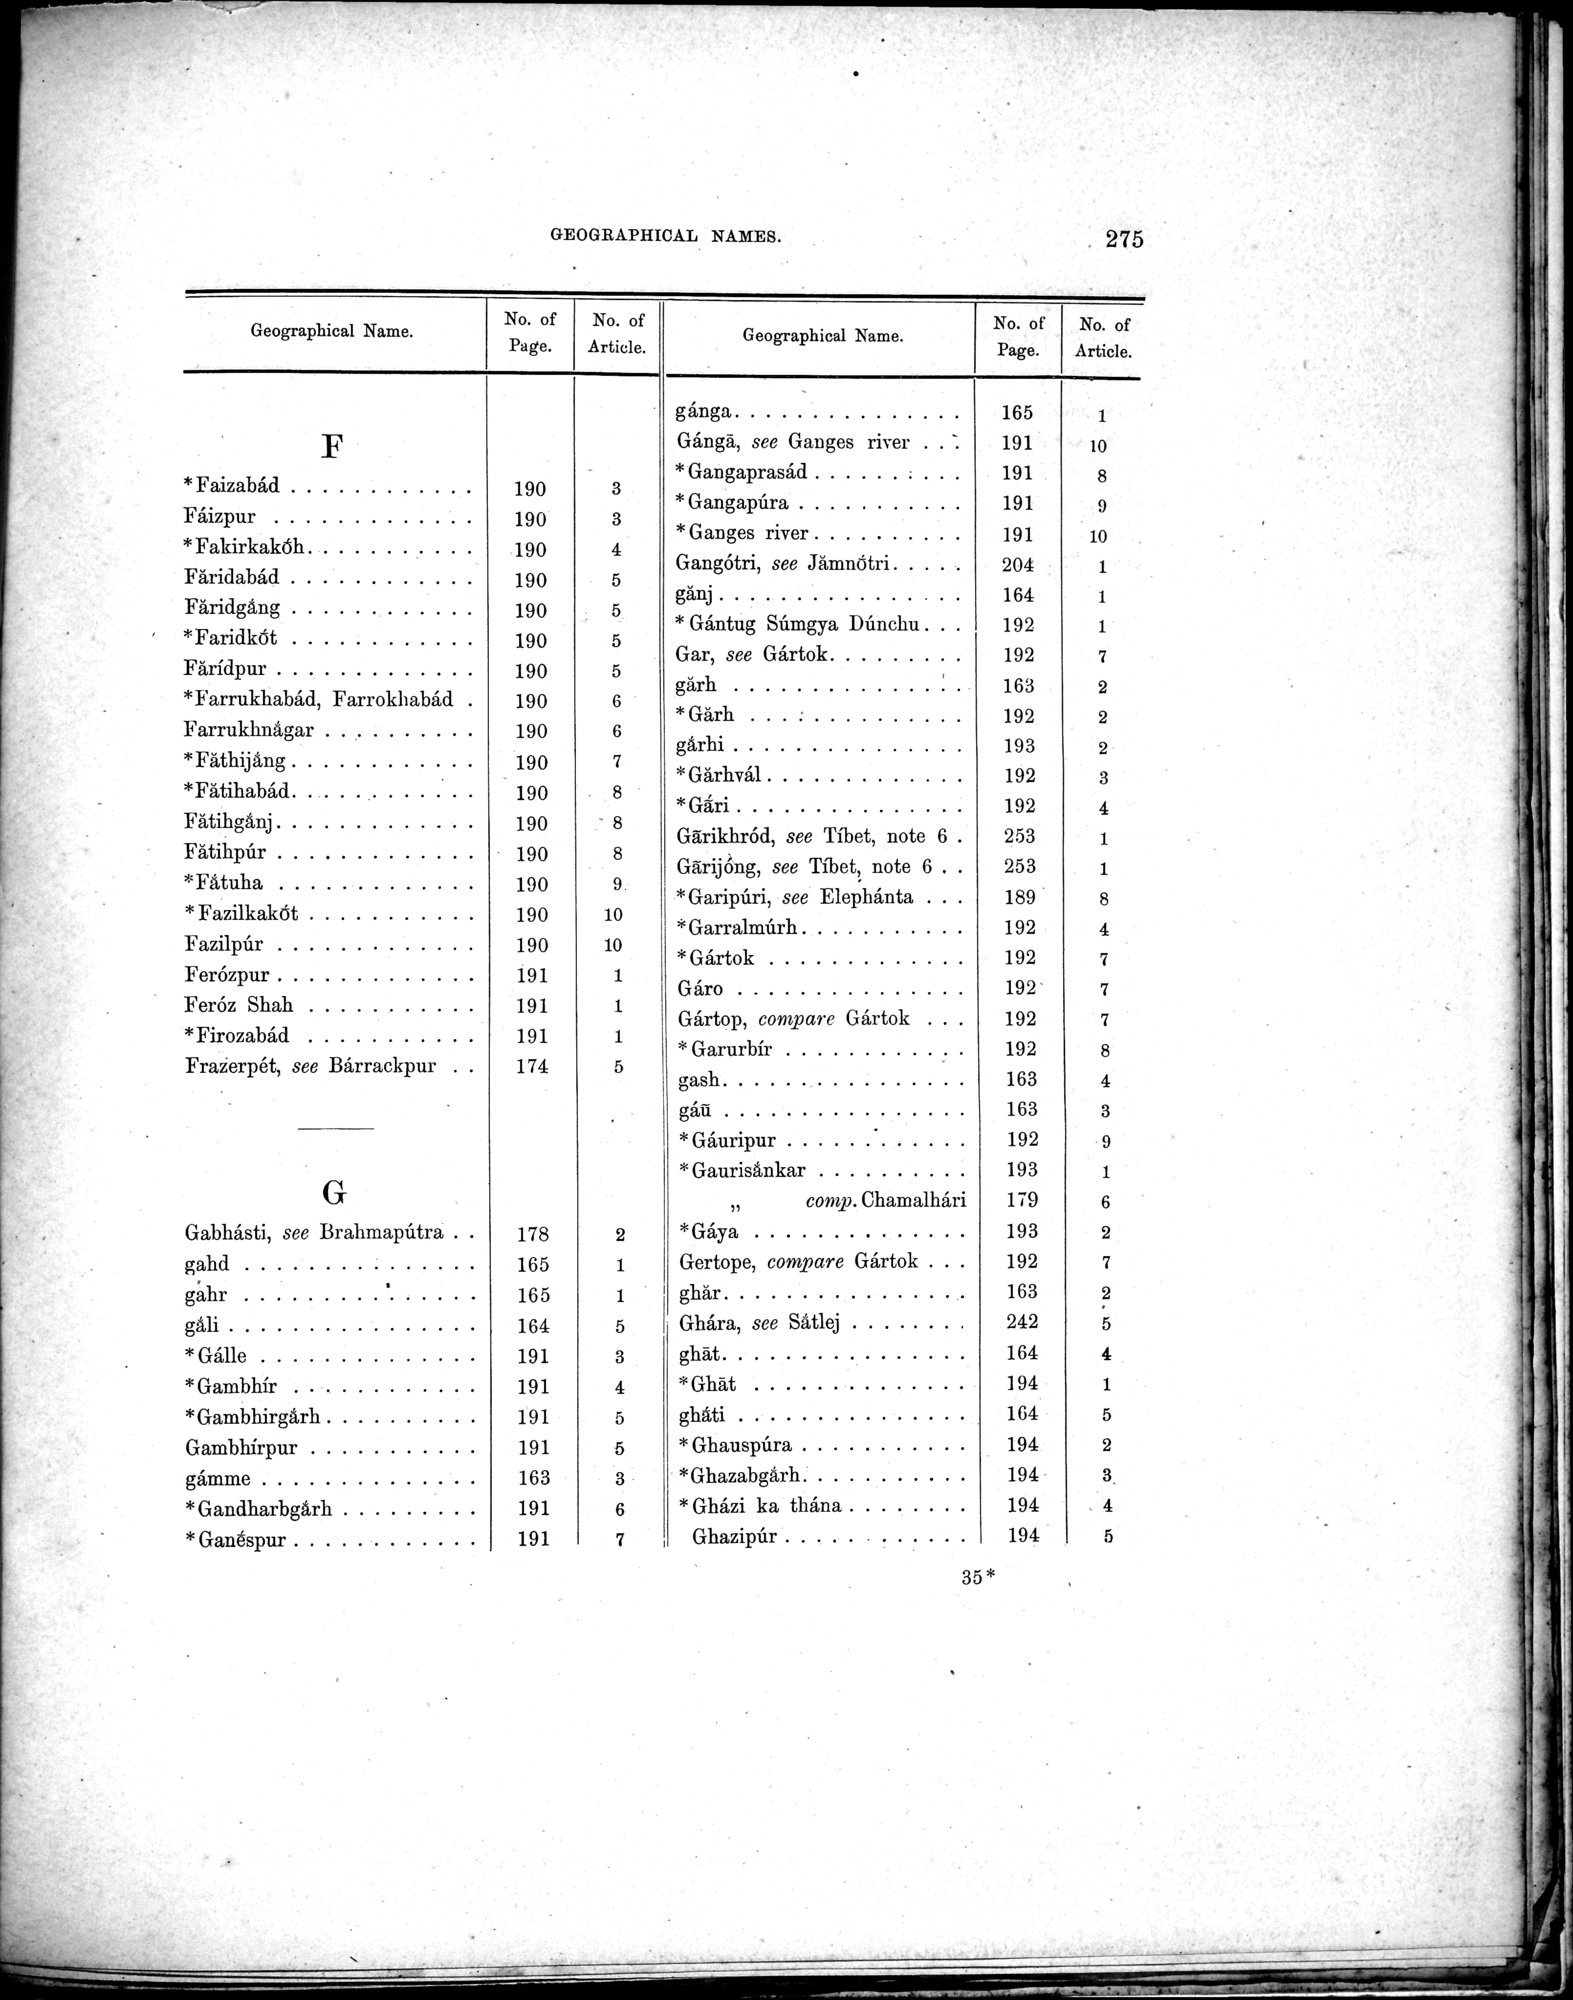 Results of a Scientific Mission to India and High Asia : vol.3 / Page 307 (Grayscale High Resolution Image)